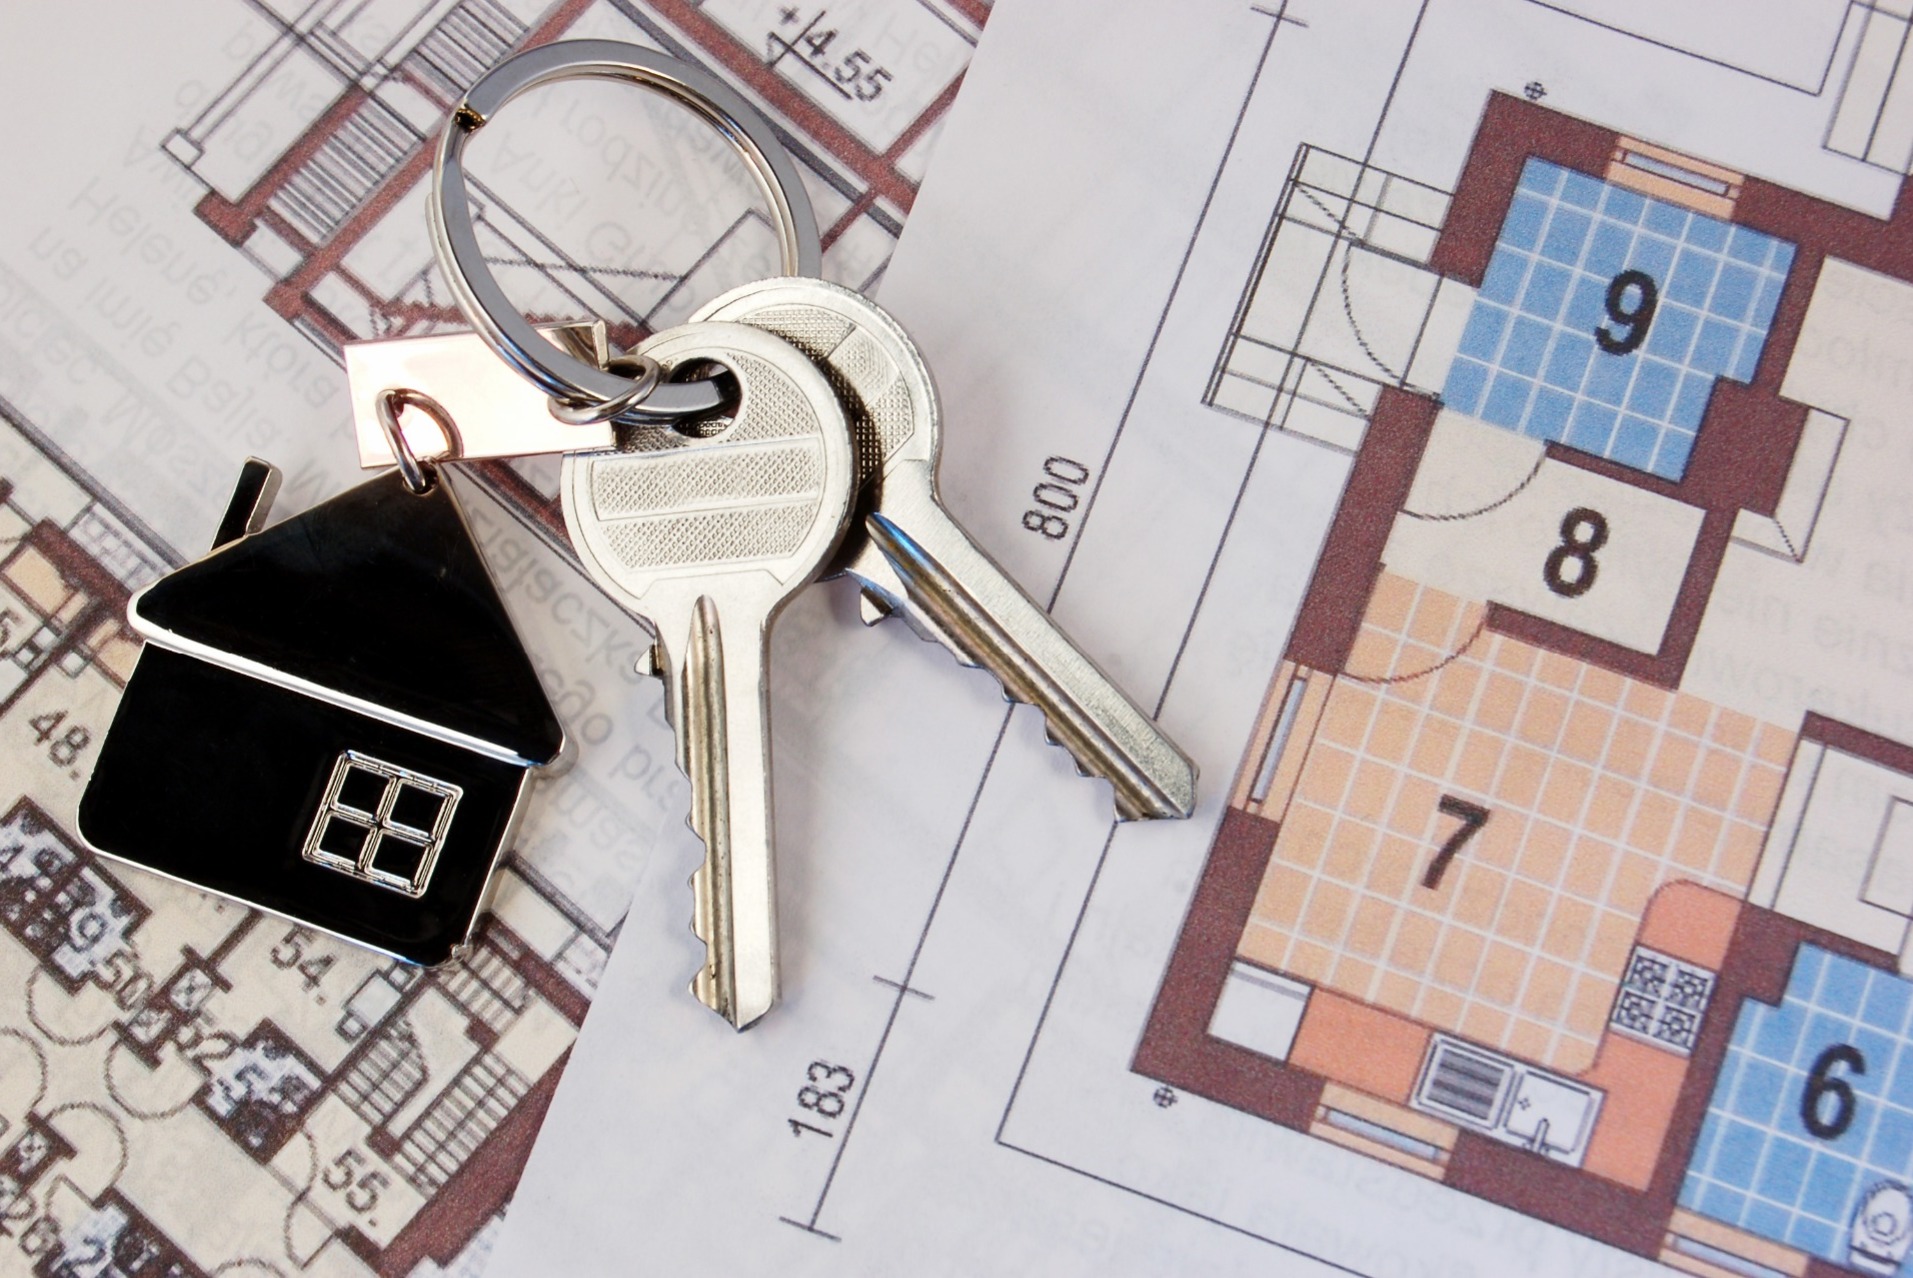 A property paper cut-out, with a pair of keys attached.